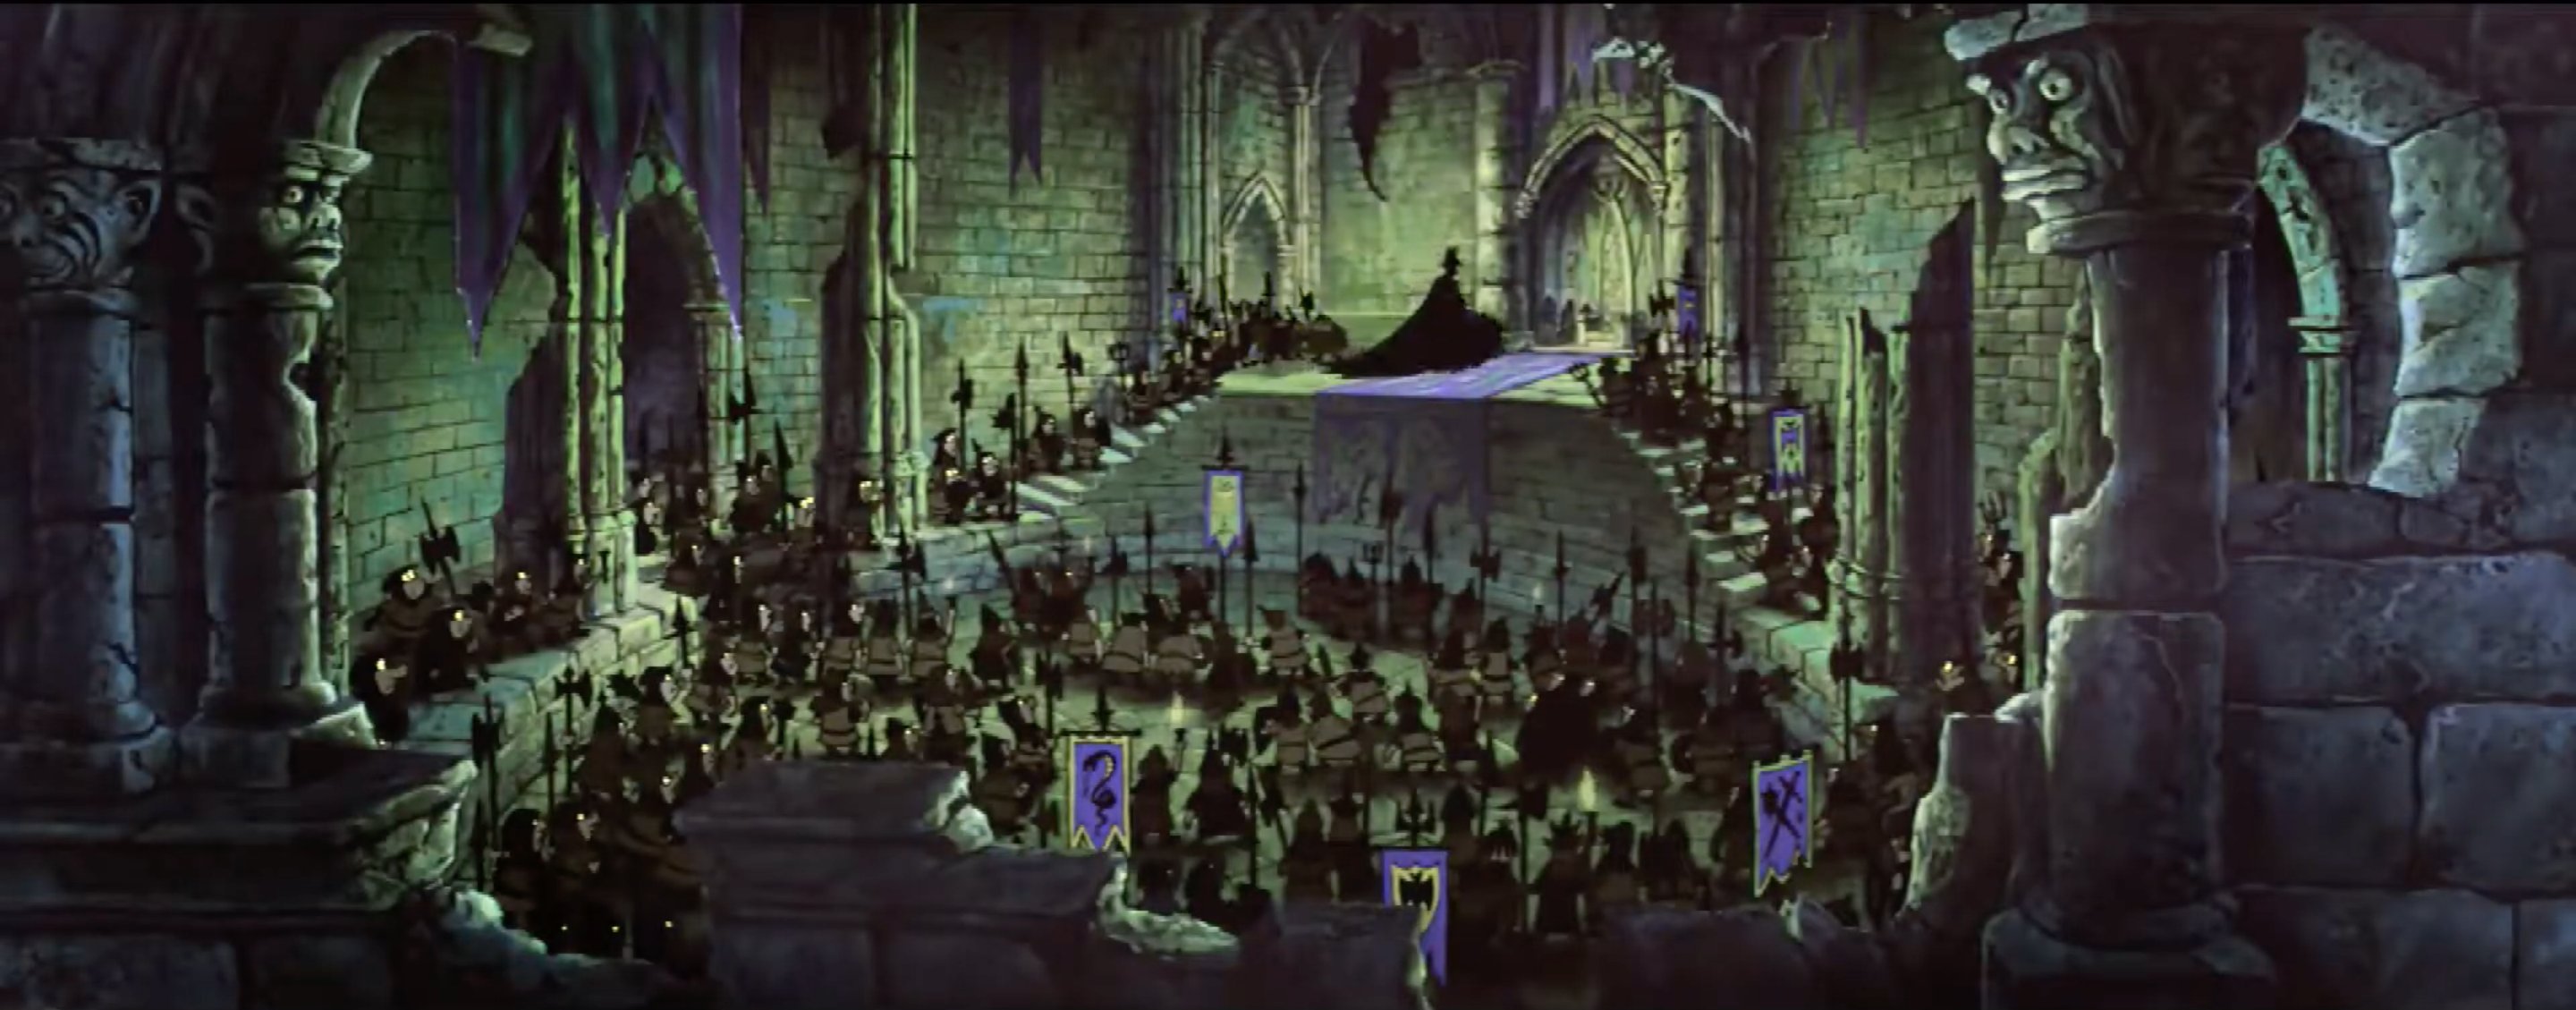 Animated Antic on Twitter: "One attention to detail I love in Sleeping Beauty are in the backgrounds in Maleficent's castle. After the scene where Maleficent lashes out at her goons, the spires